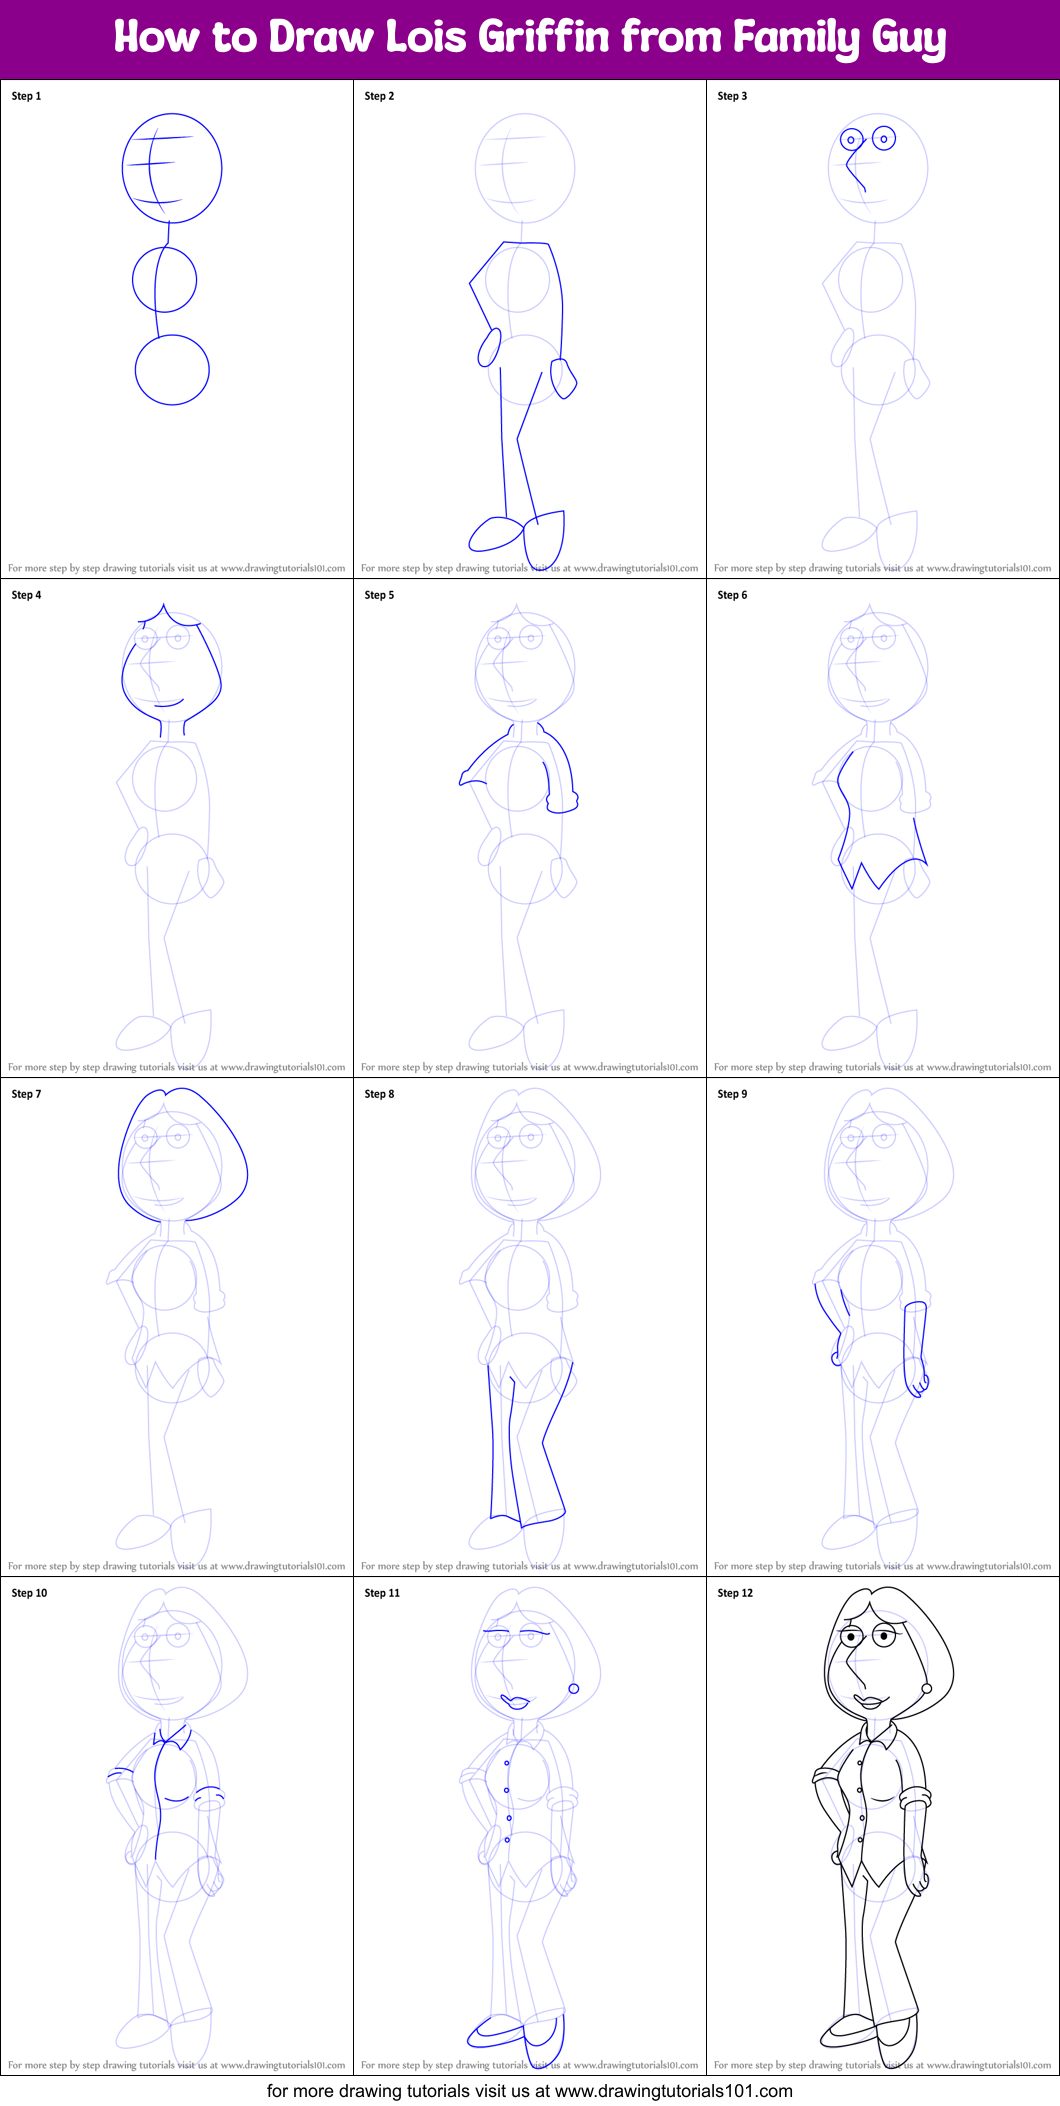 How to Draw Lois Griffin from Family Guy printable step by step drawing